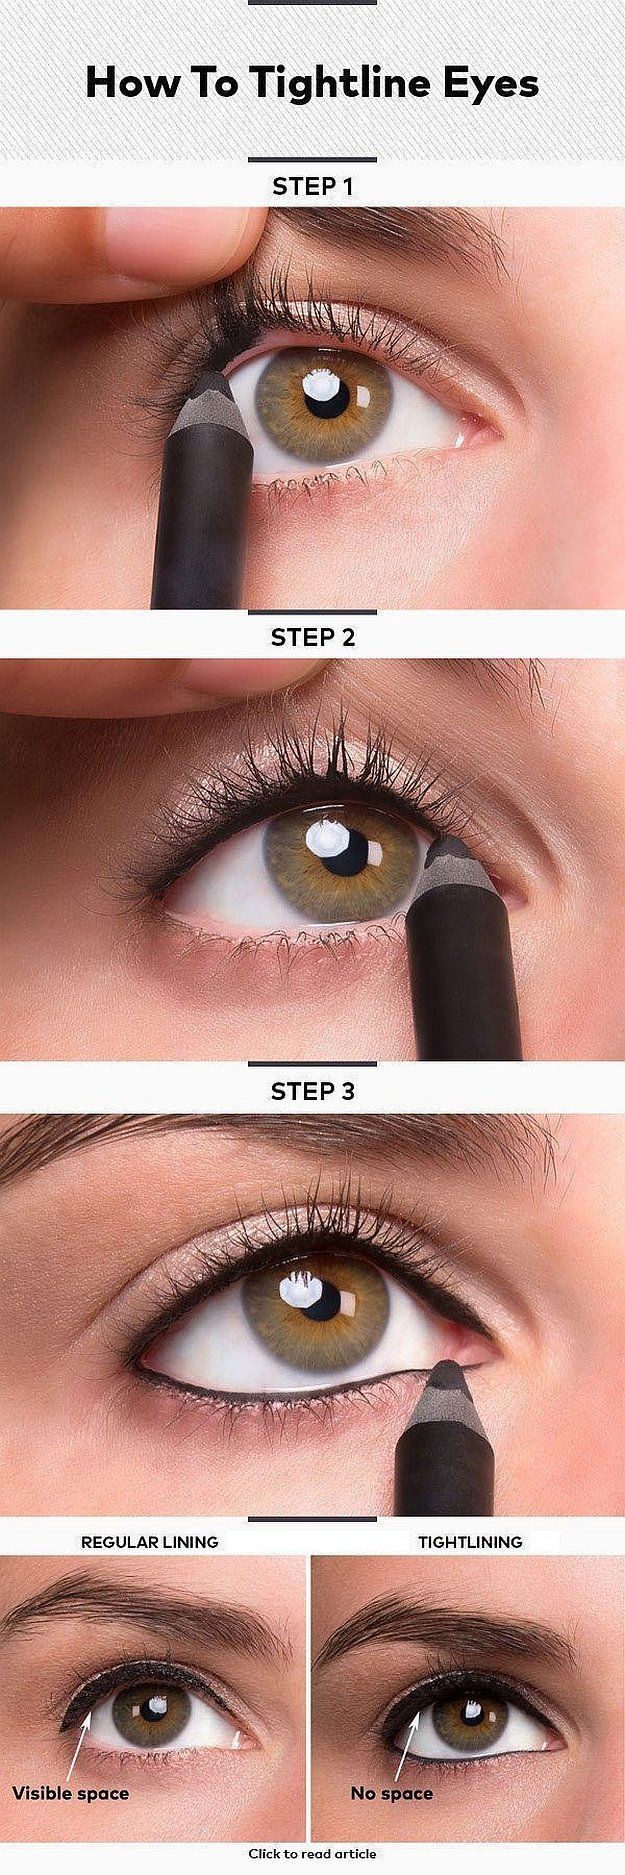 Tightlining 101: Make Your Eyes Bigger & Lashes Thicker, check it out at makeupt...